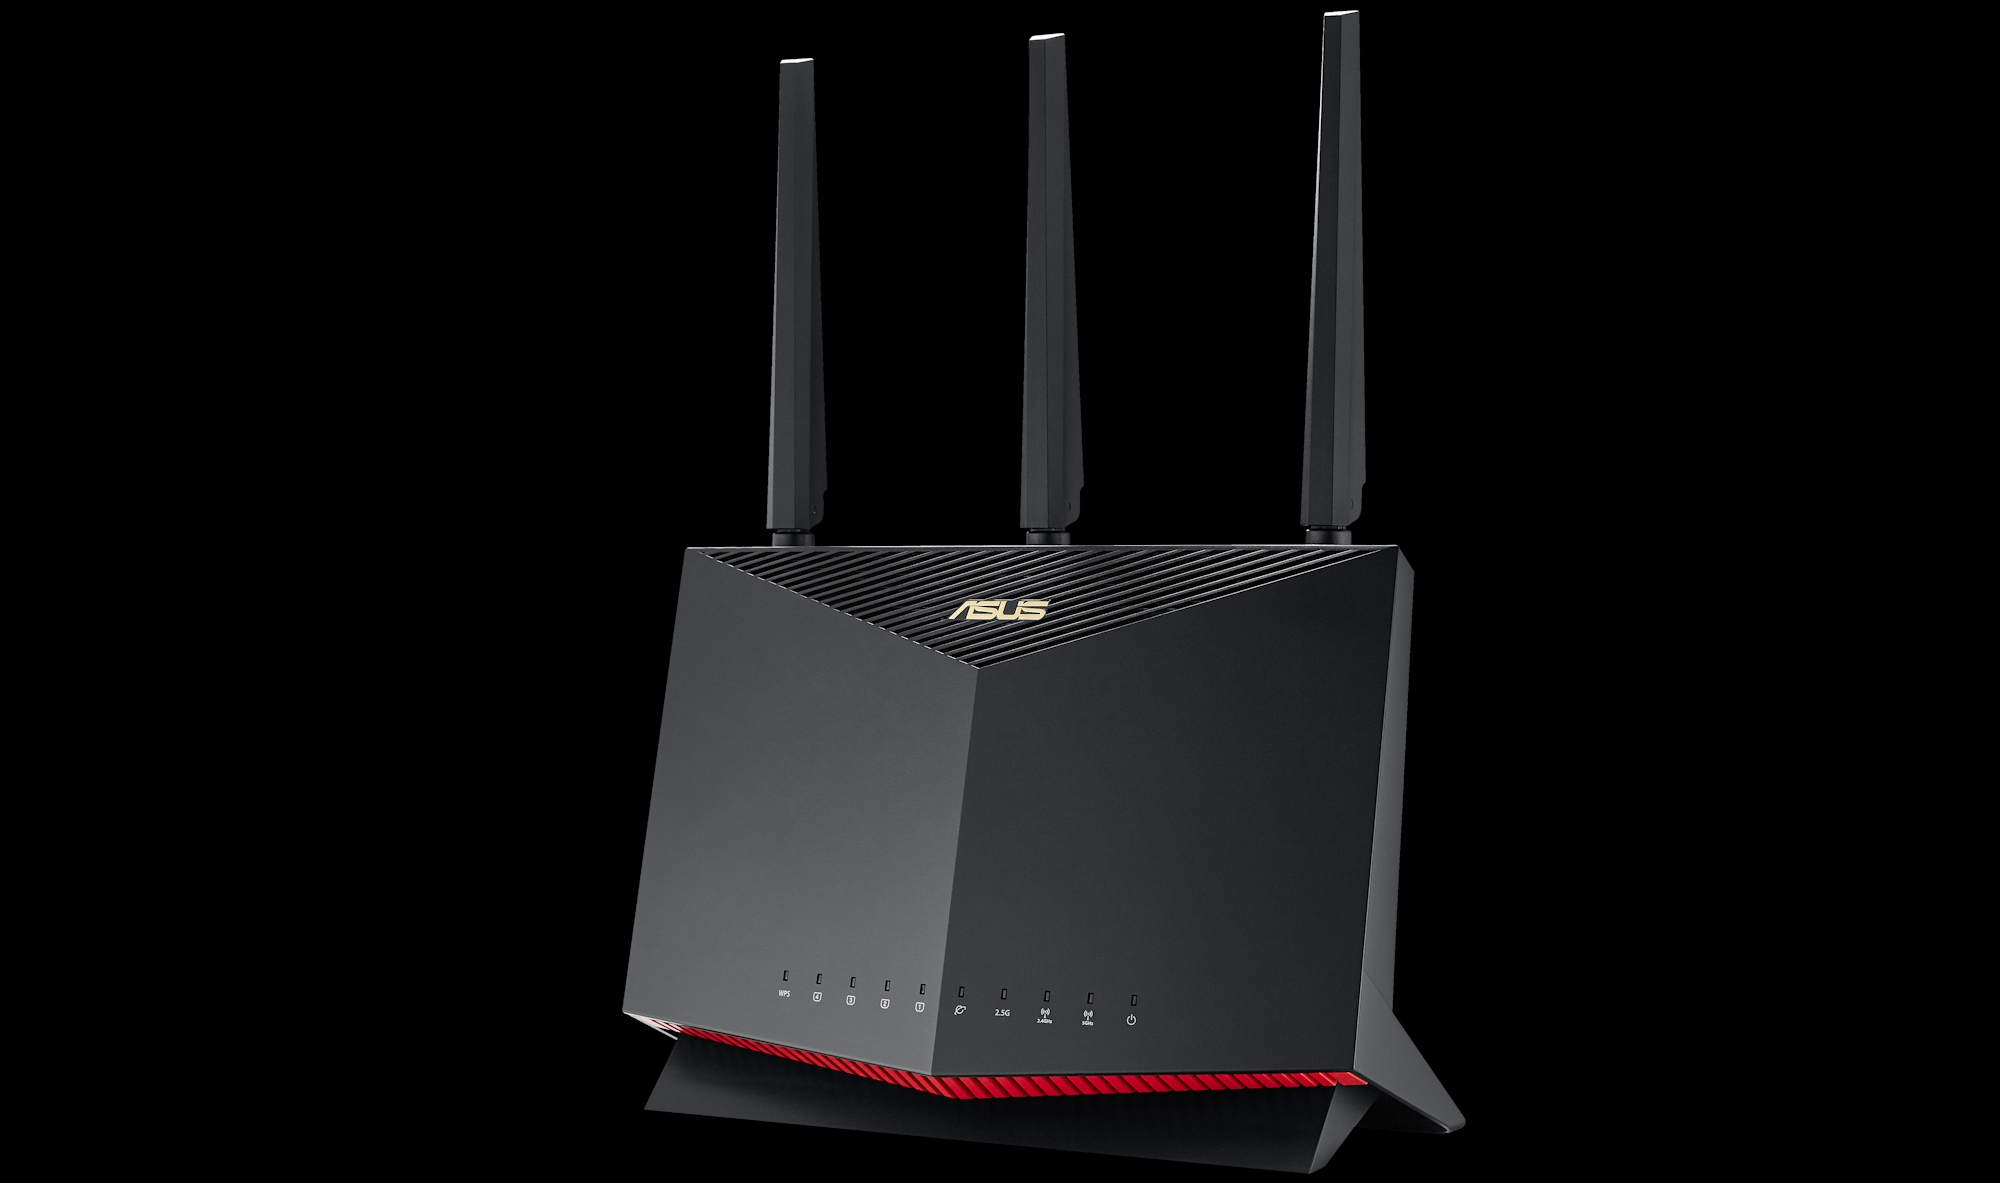 The ASUS RT-AX88U Pro wireless router